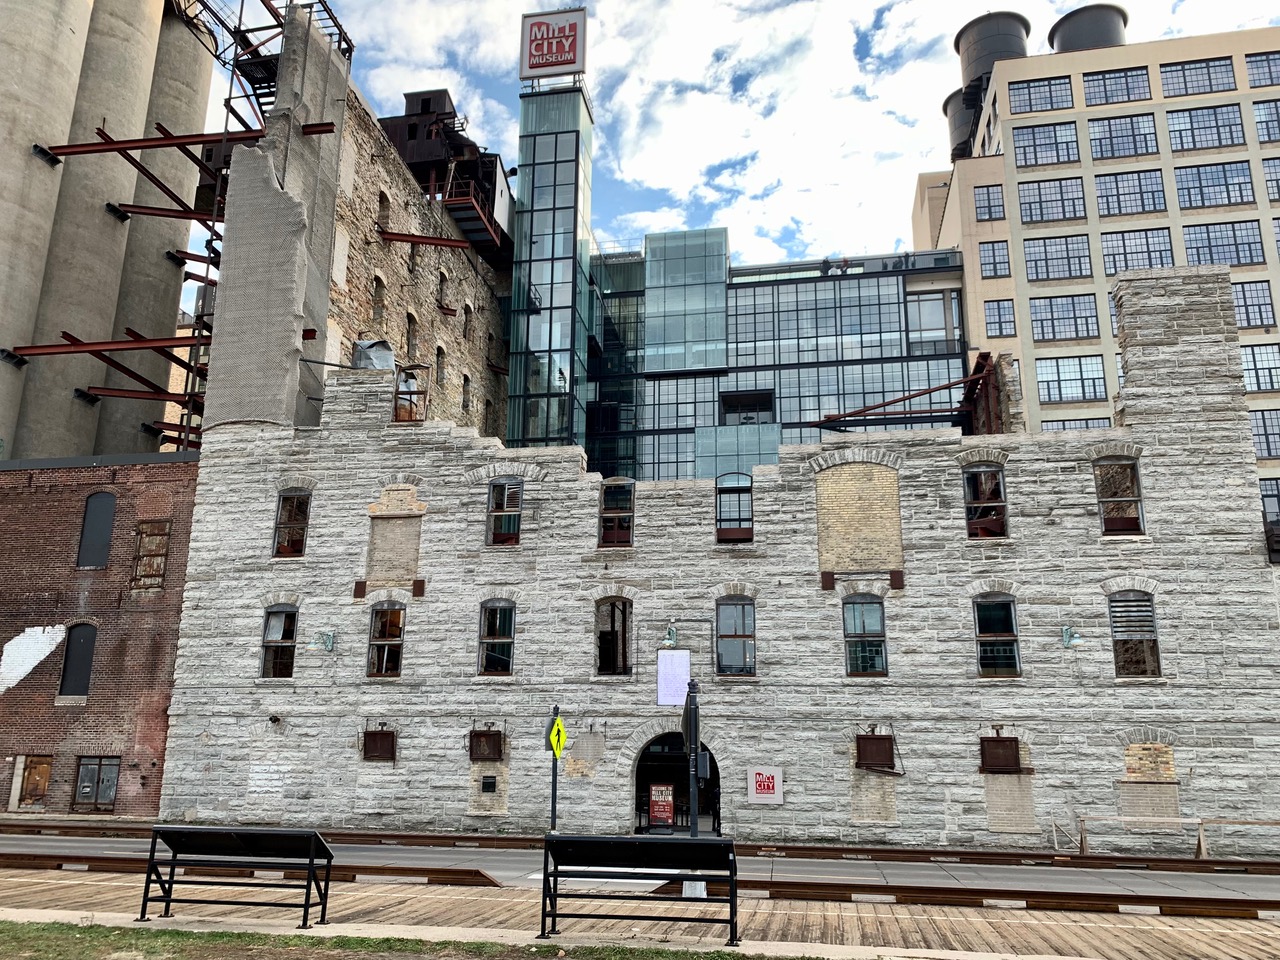 The Mill City Museum from its front.